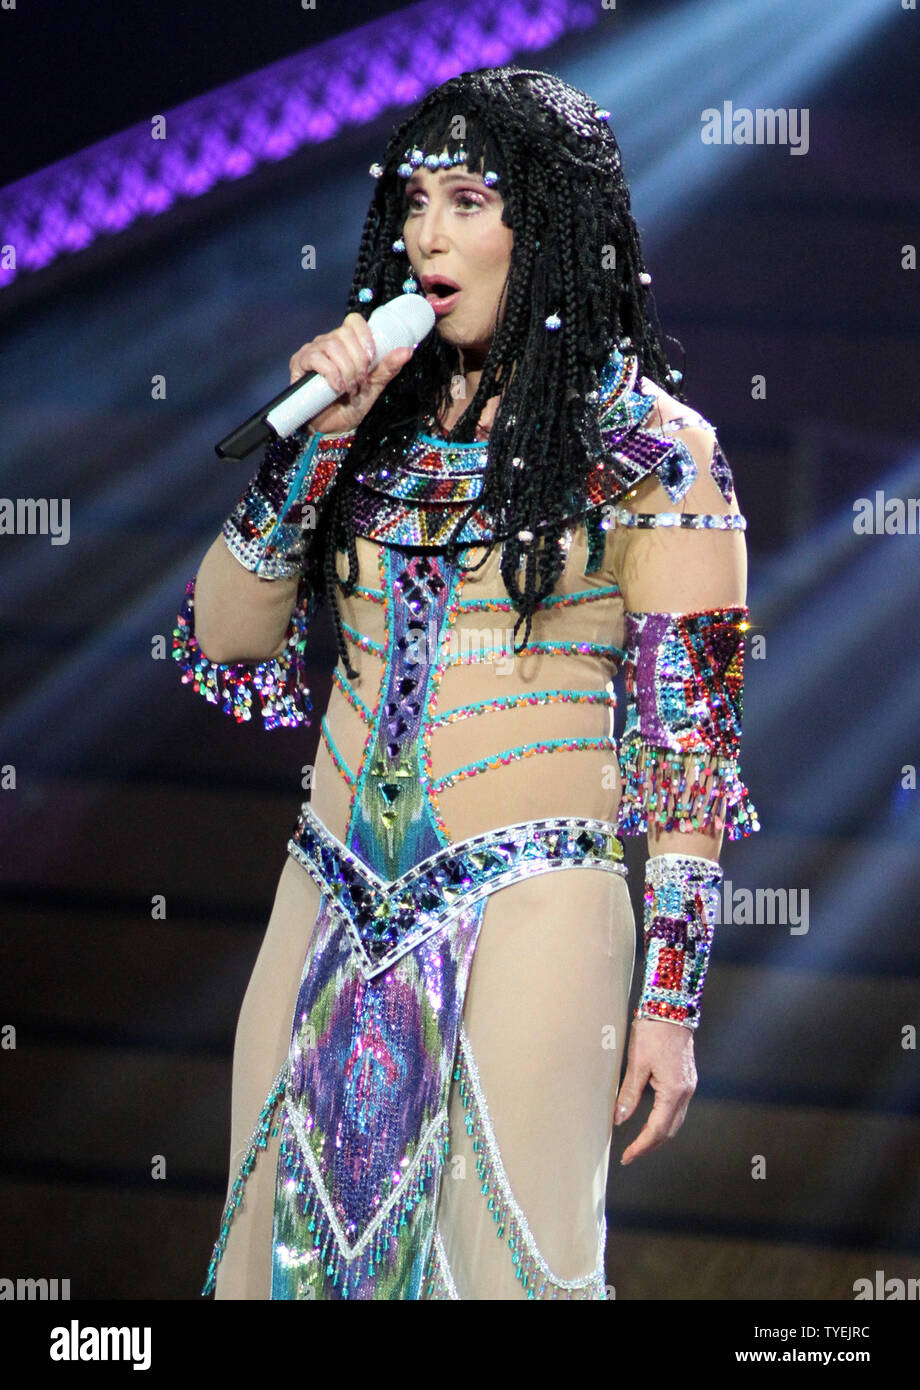 Cher performs in concert on her 'D2K Tour', at the BB & T Center in Sunrise, Florida on May 17, 2014.  UPI/Michael Bush Stock Photo